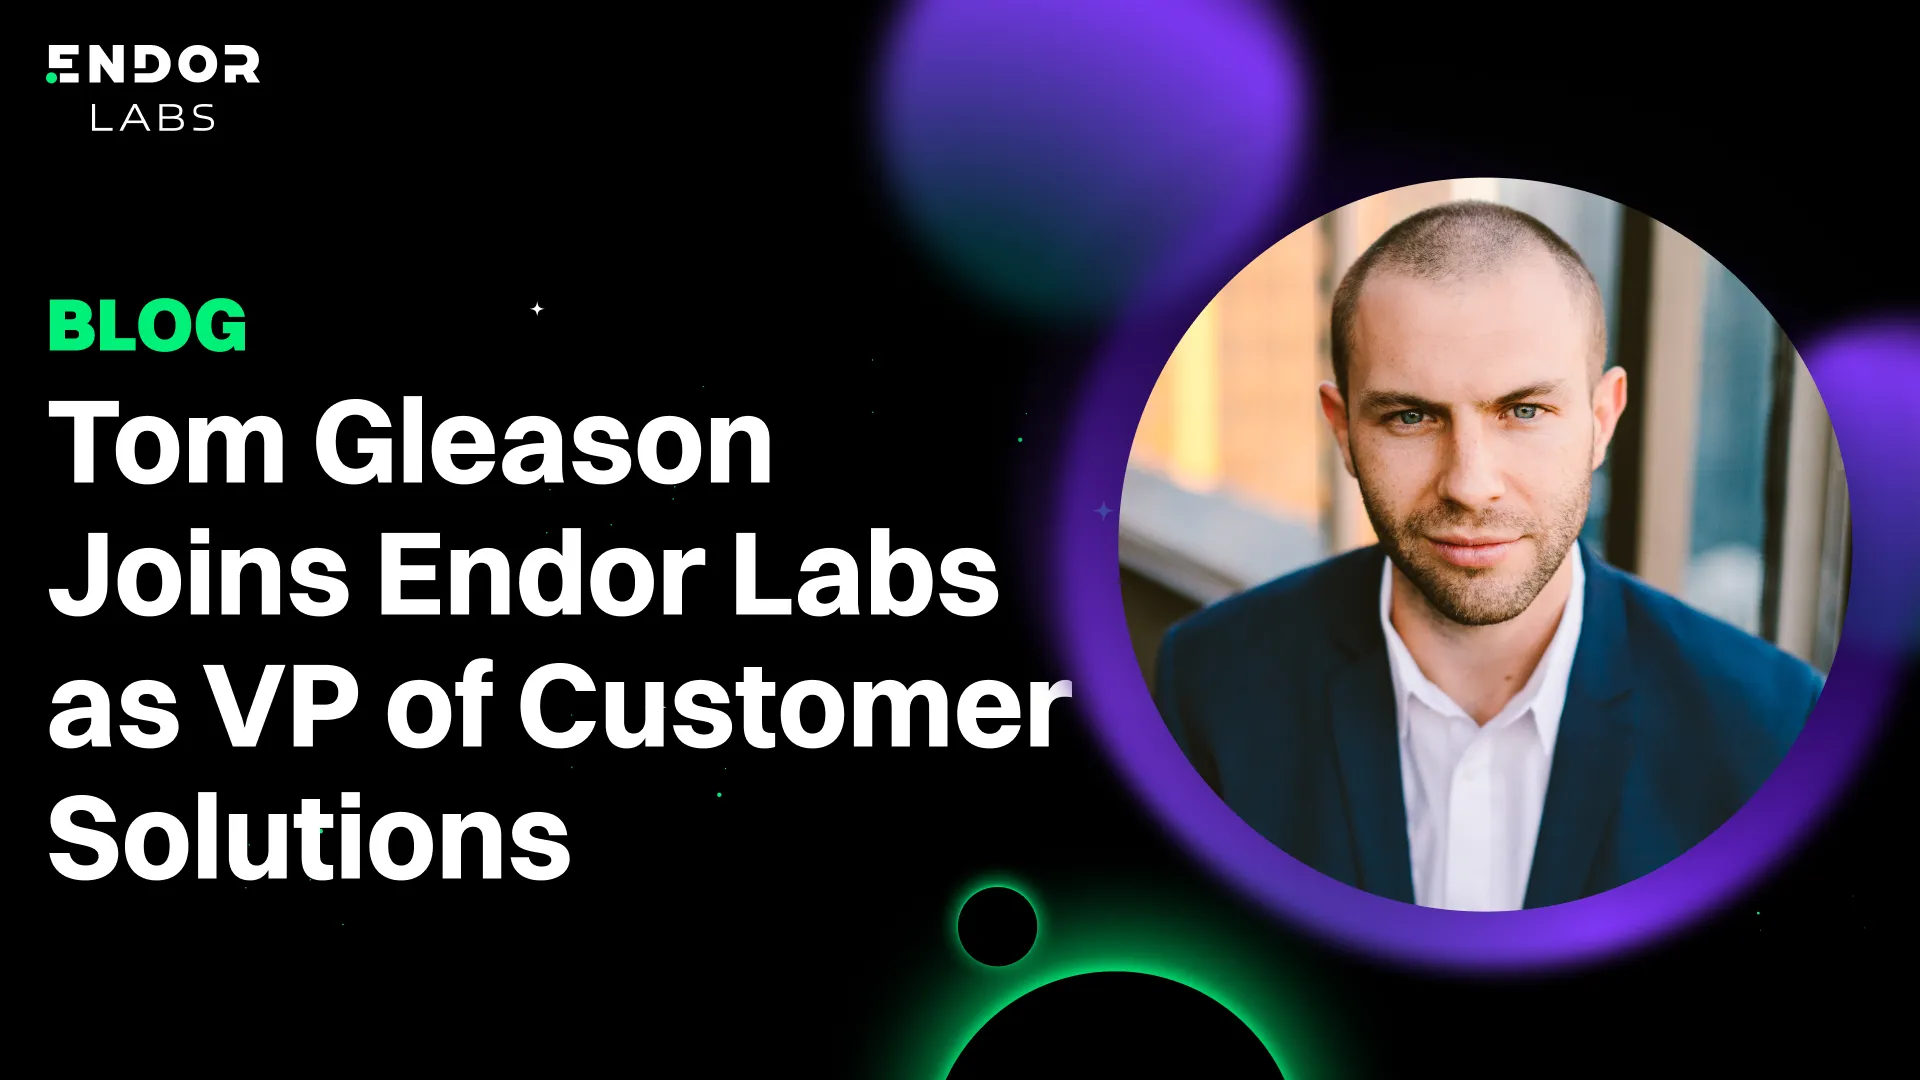 Tom Gleason Joins Endor Labs as VP of Customer Solutions